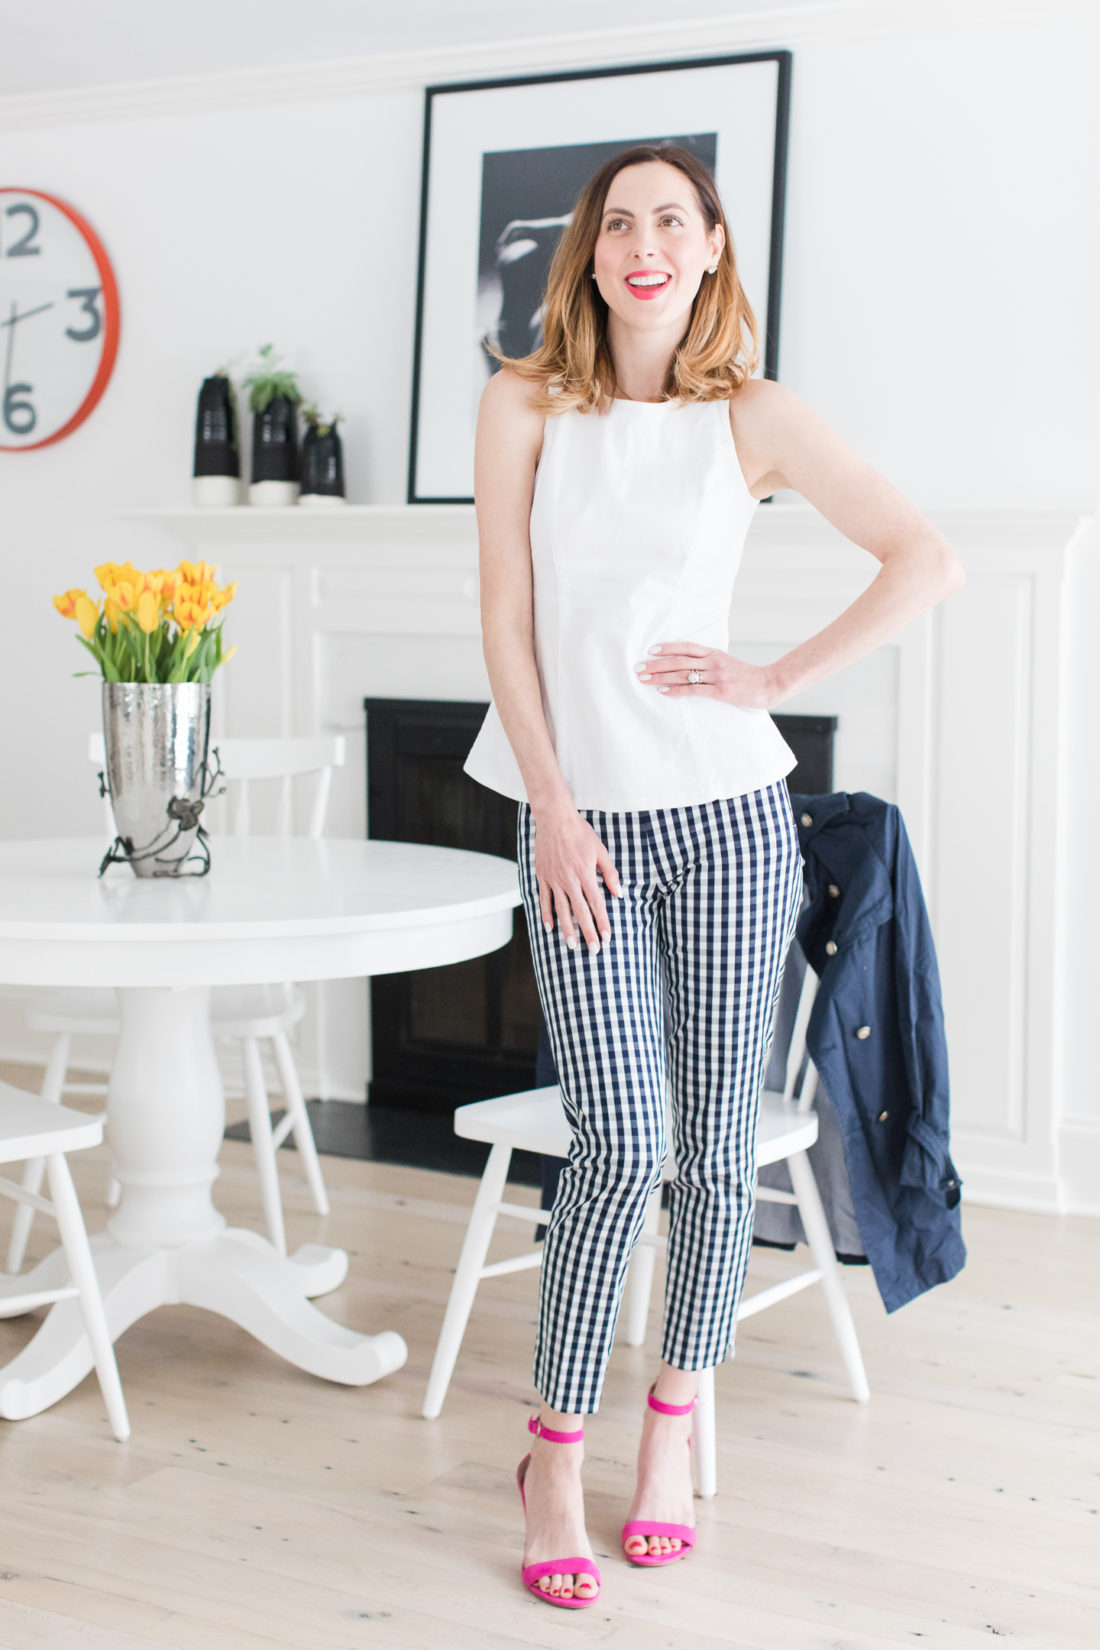 Eva Amurri Martino wears her outfit of secondhand clothes from thredUP